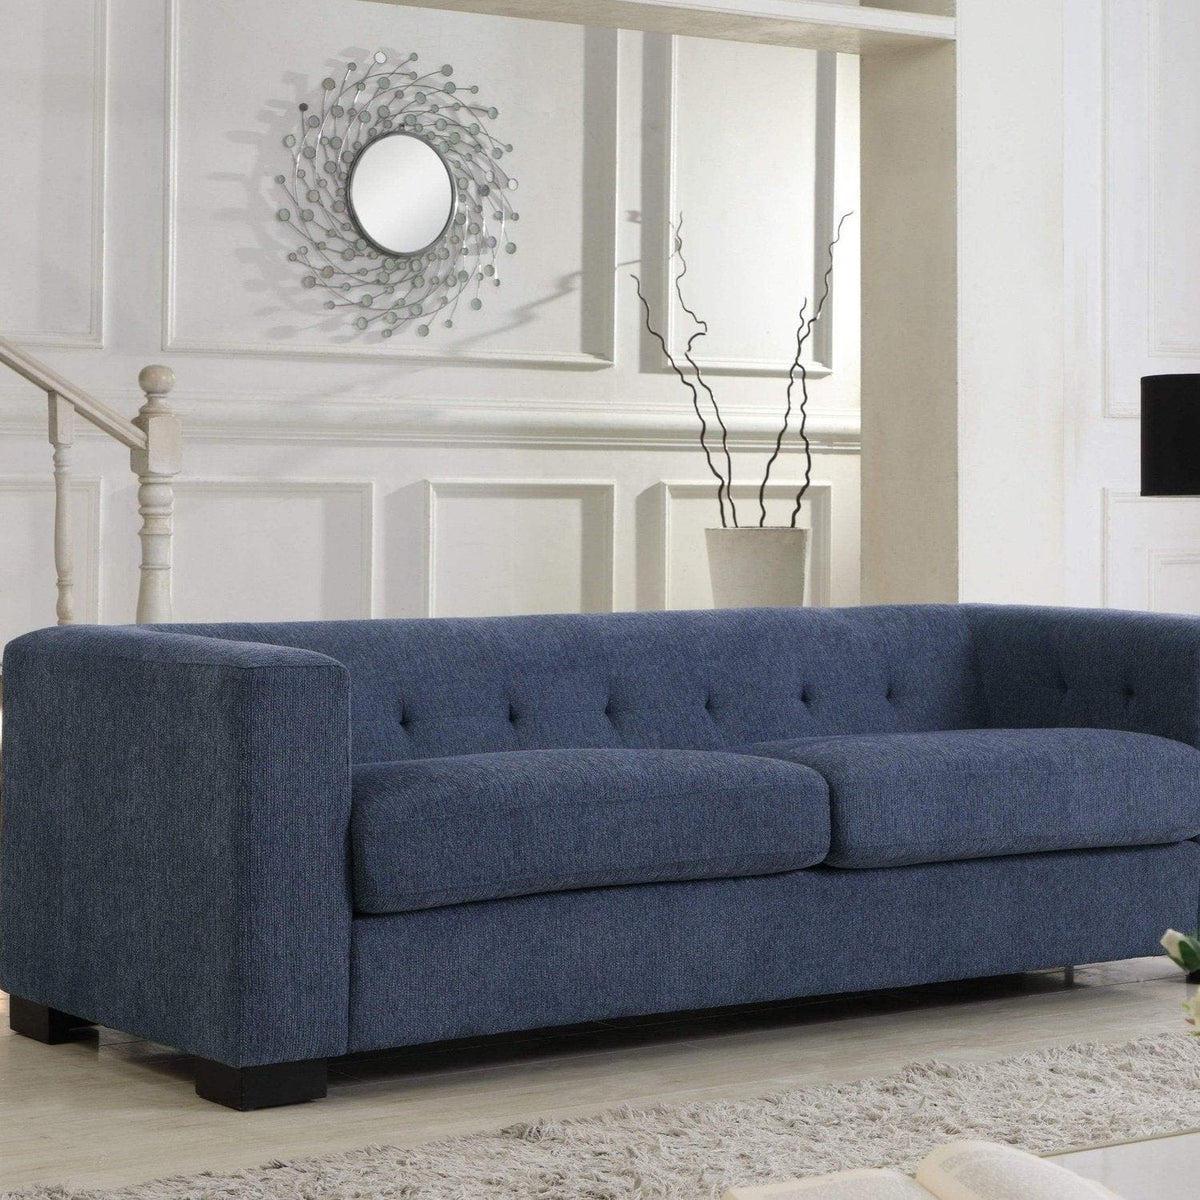 Iconic Home Limoges Plush Chenille Upholstered Sofa Blue